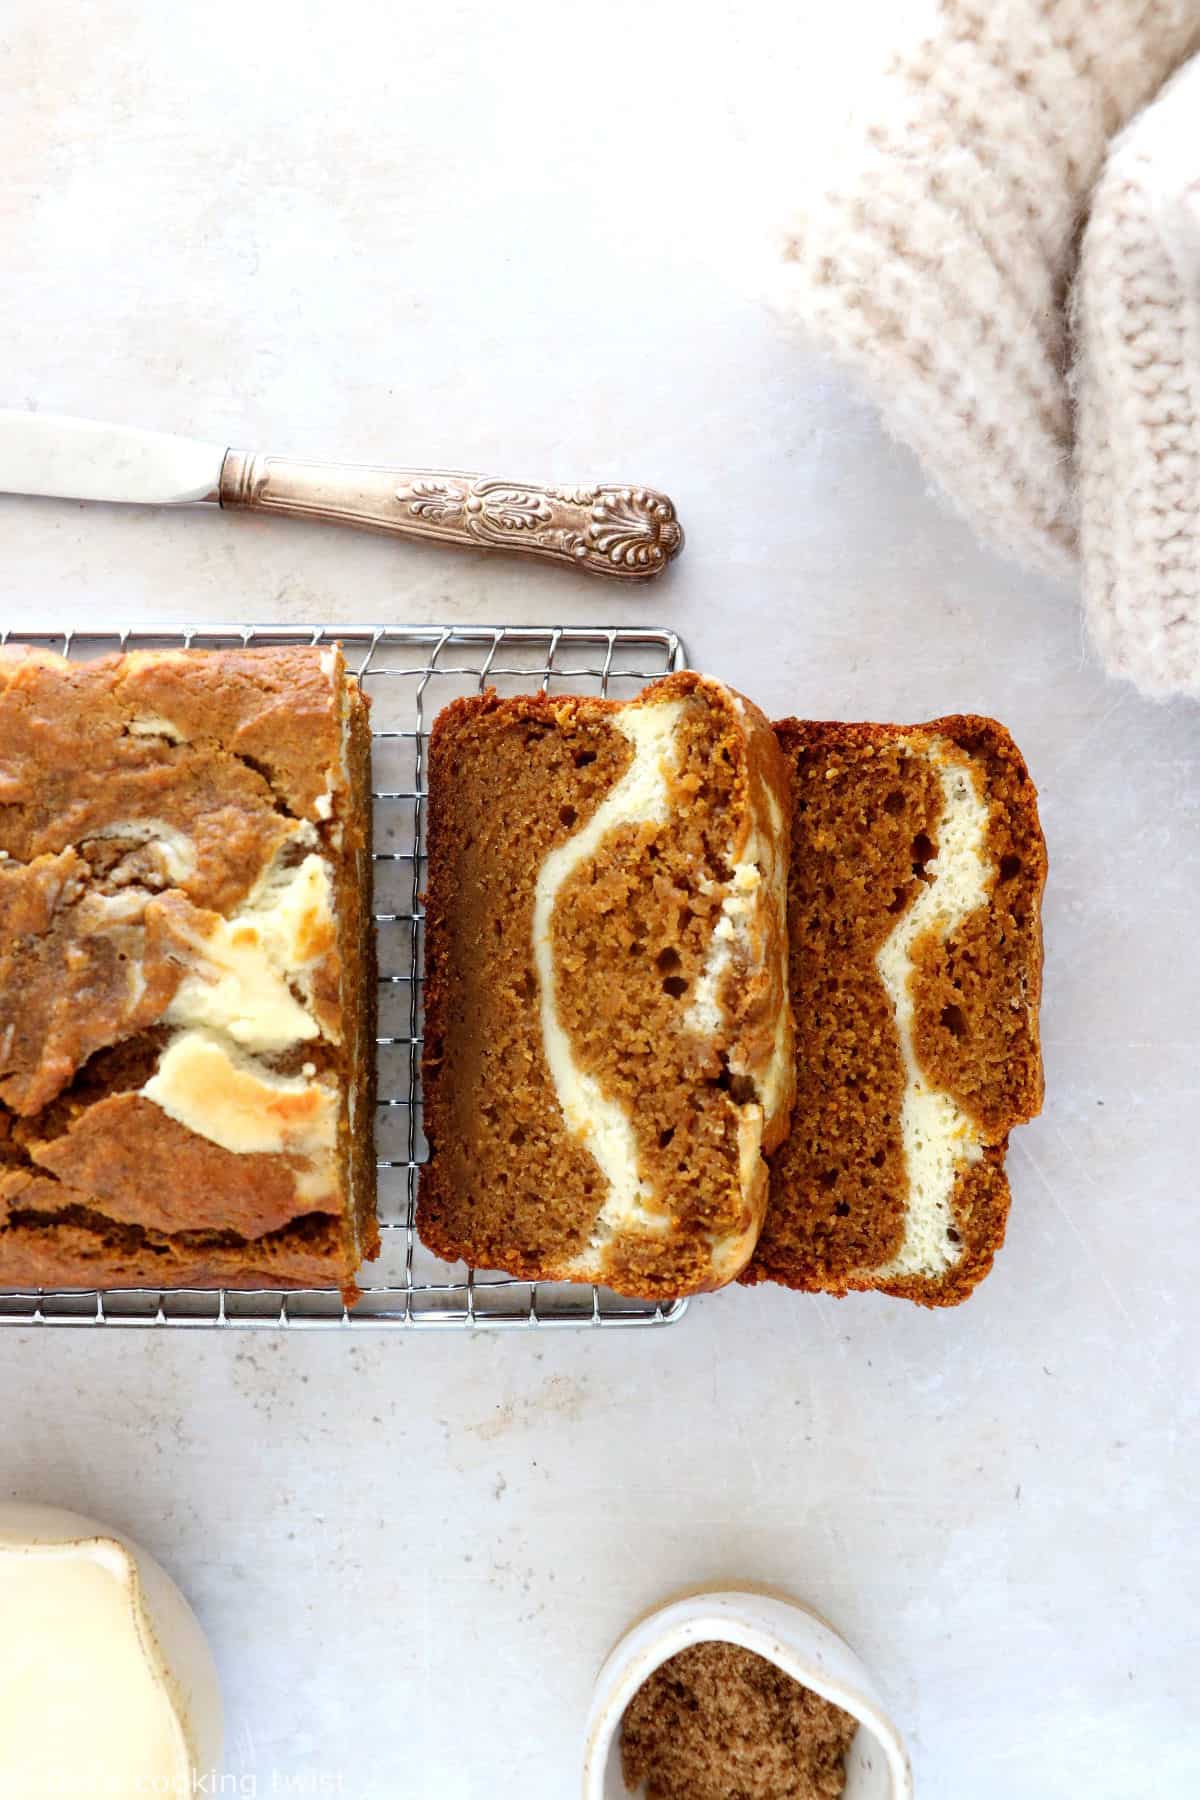 Brown butter pumpkin bread with cream cheese is the ultimate fall treat to indulge. This pumpkin bread is soft, moist, loaded with pumpkin spice flavors, and better than in your favorite coffee shop!